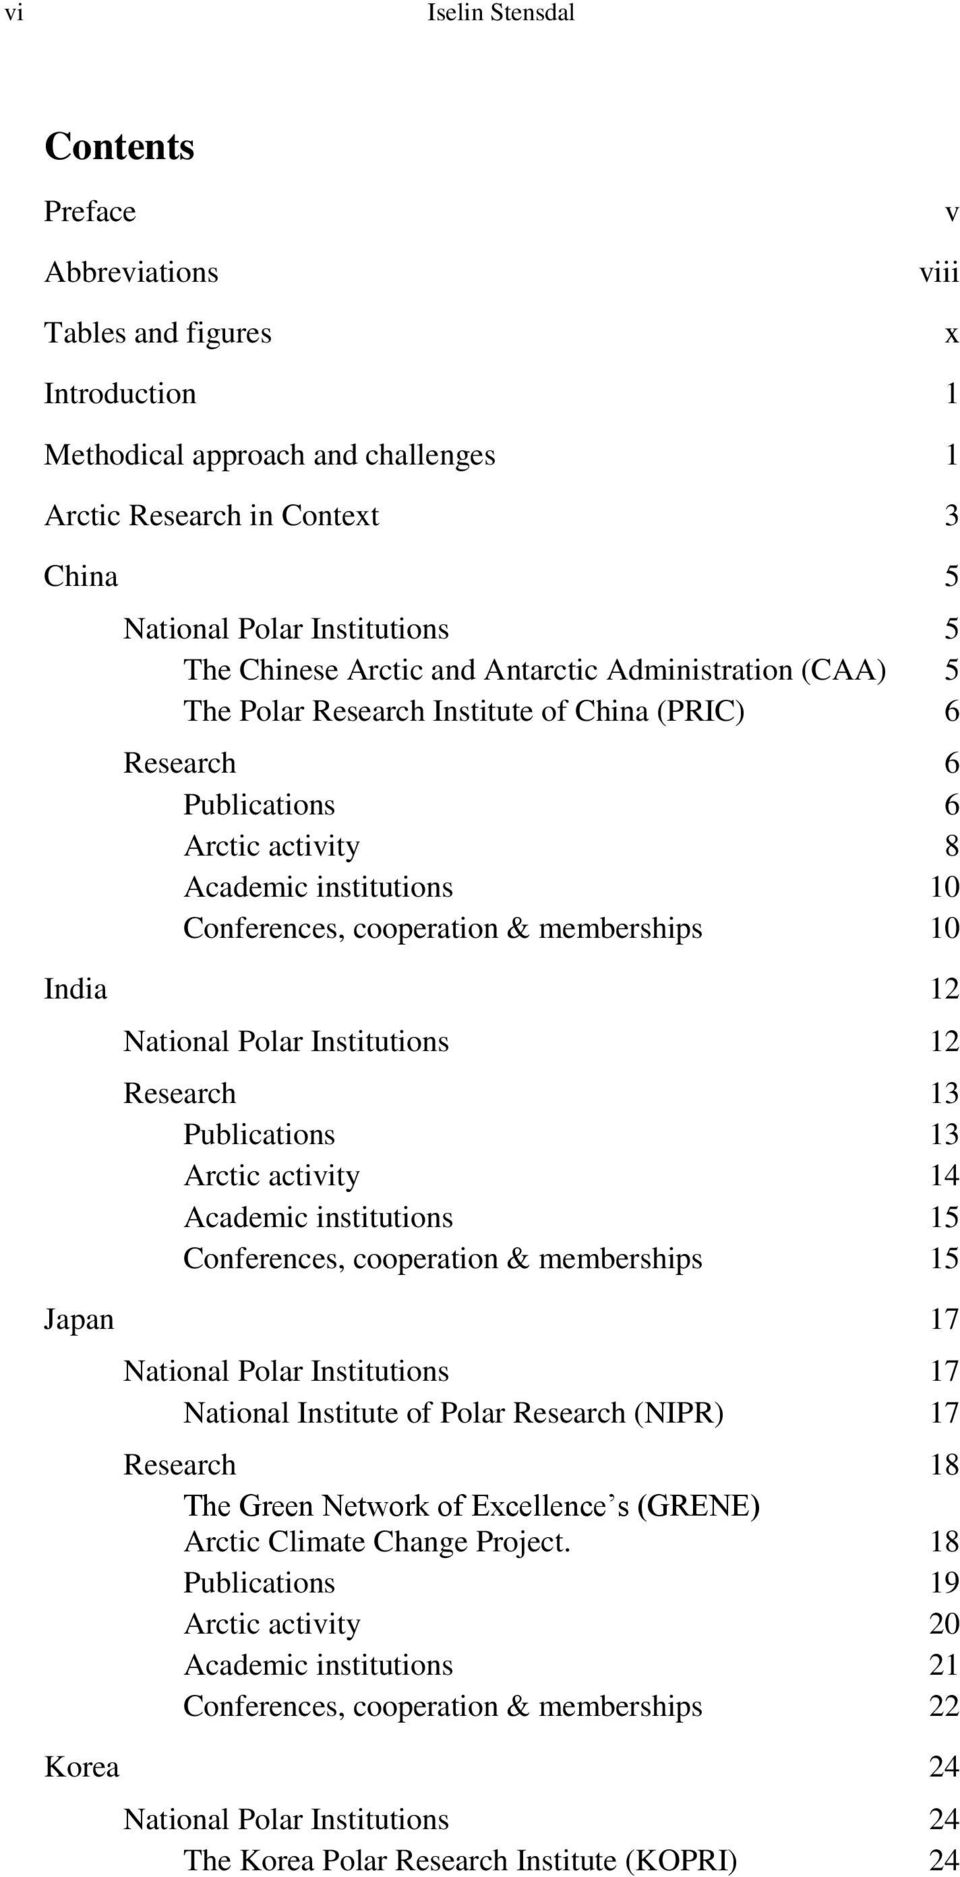 memberships 10 India 12 National Polar Institutions 12 Research 13 Publications 13 Arctic activity 14 Academic institutions 15 Conferences, cooperation & memberships 15 Japan 17 National Polar